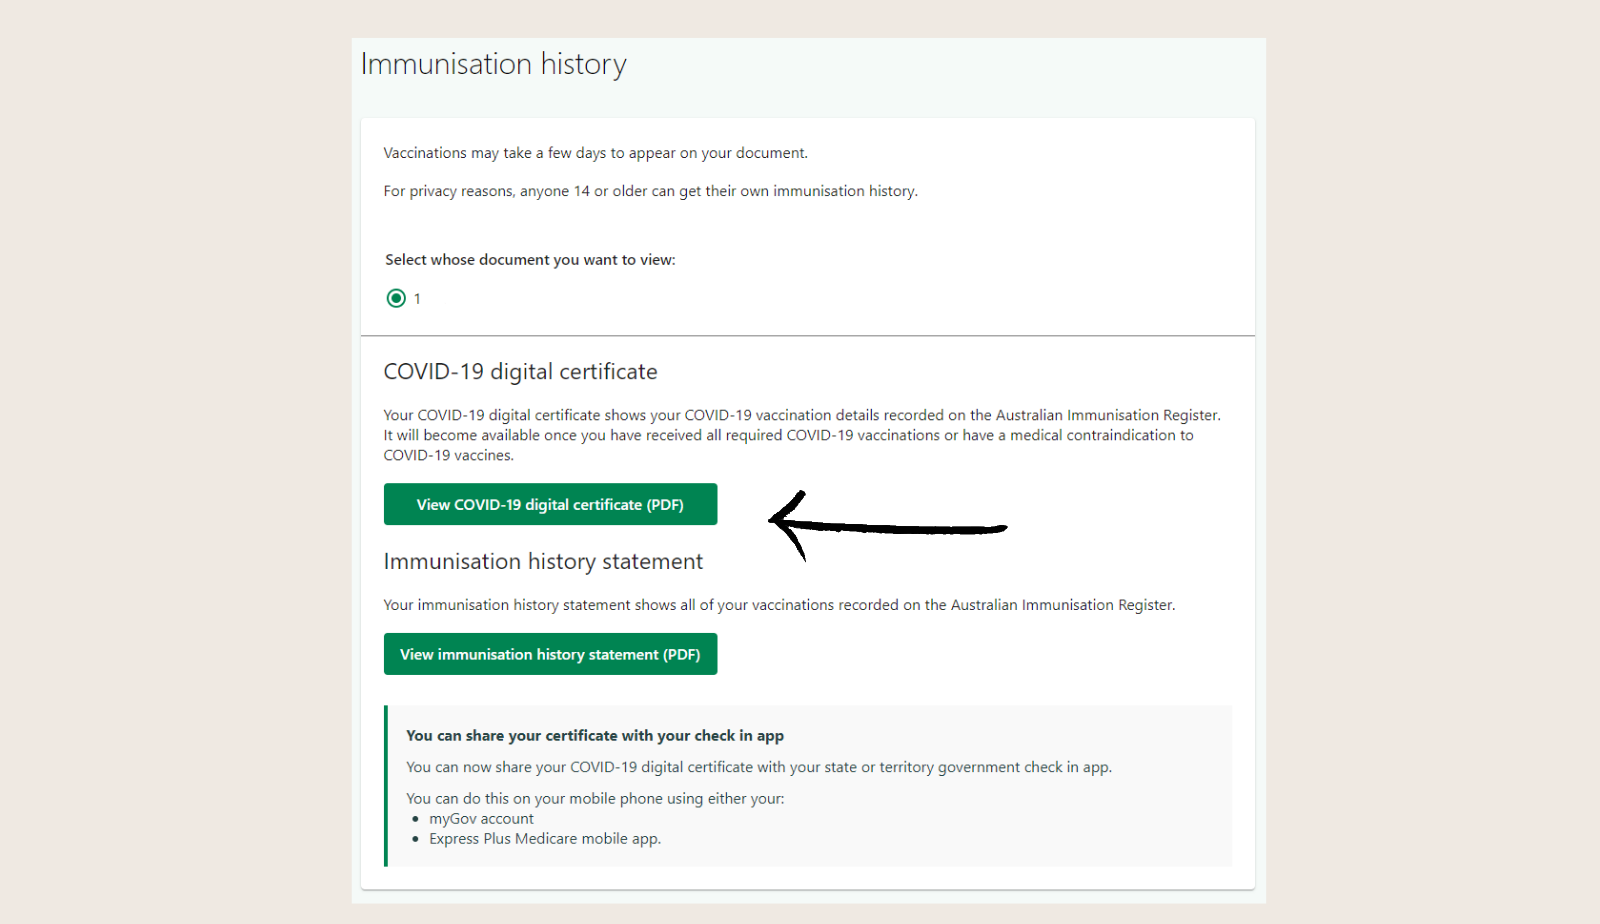 A black arrow points at a green button with the label "View COVID-19 digital certificate (PDF)"